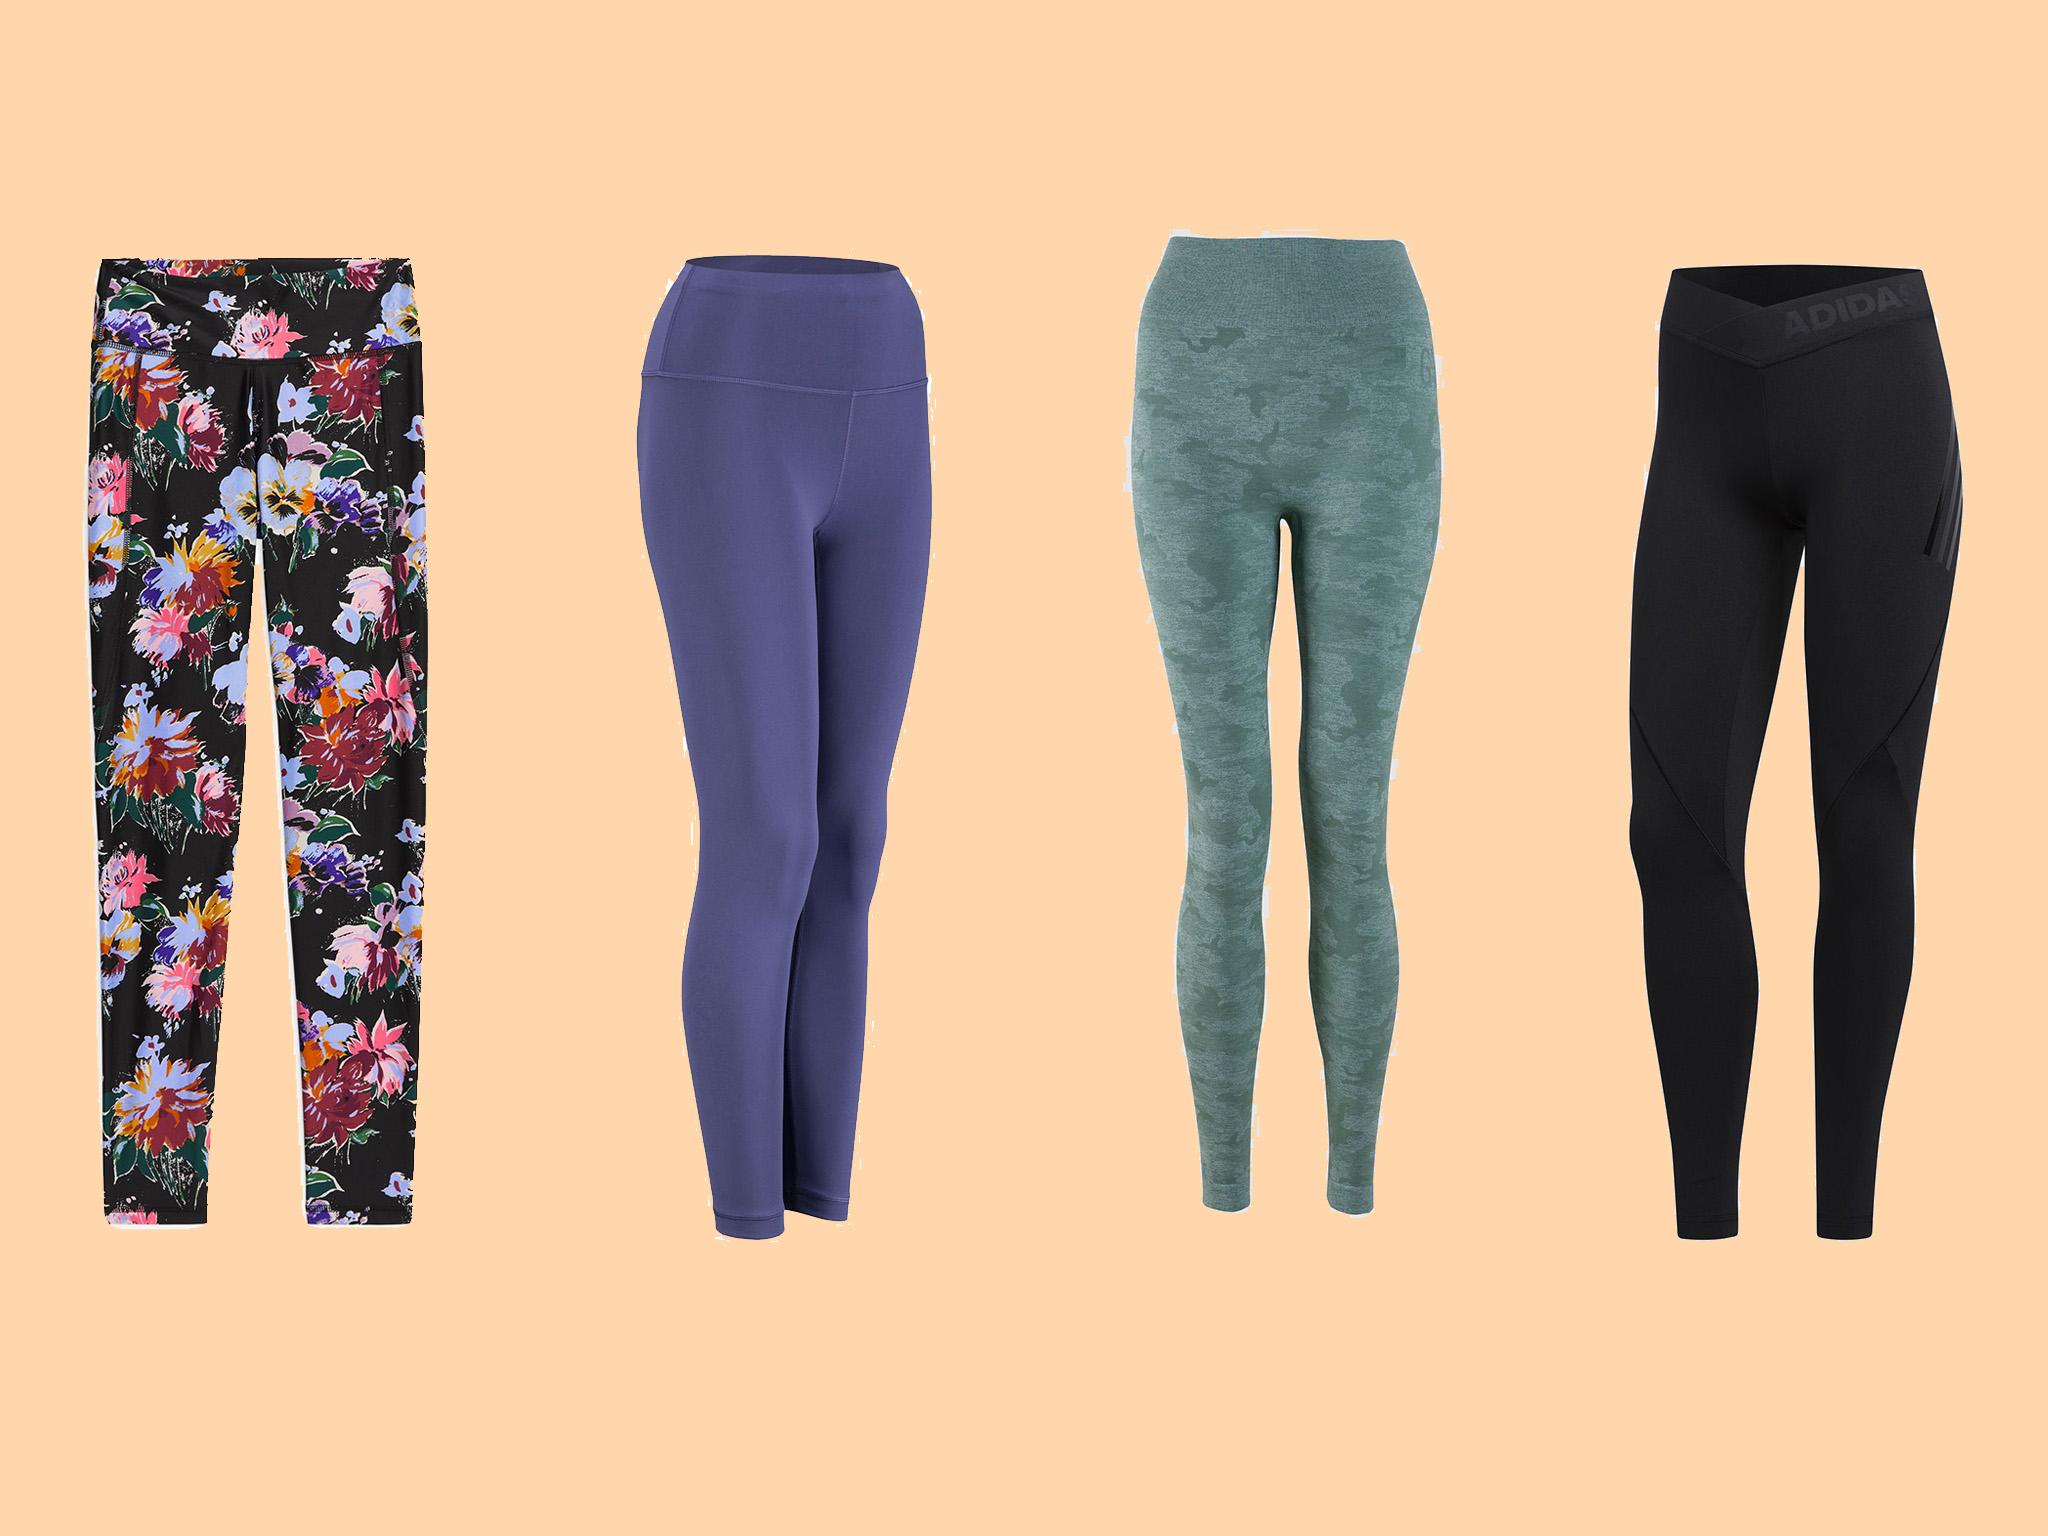 Soft Surroundings - If leggings are the new uniform, they better